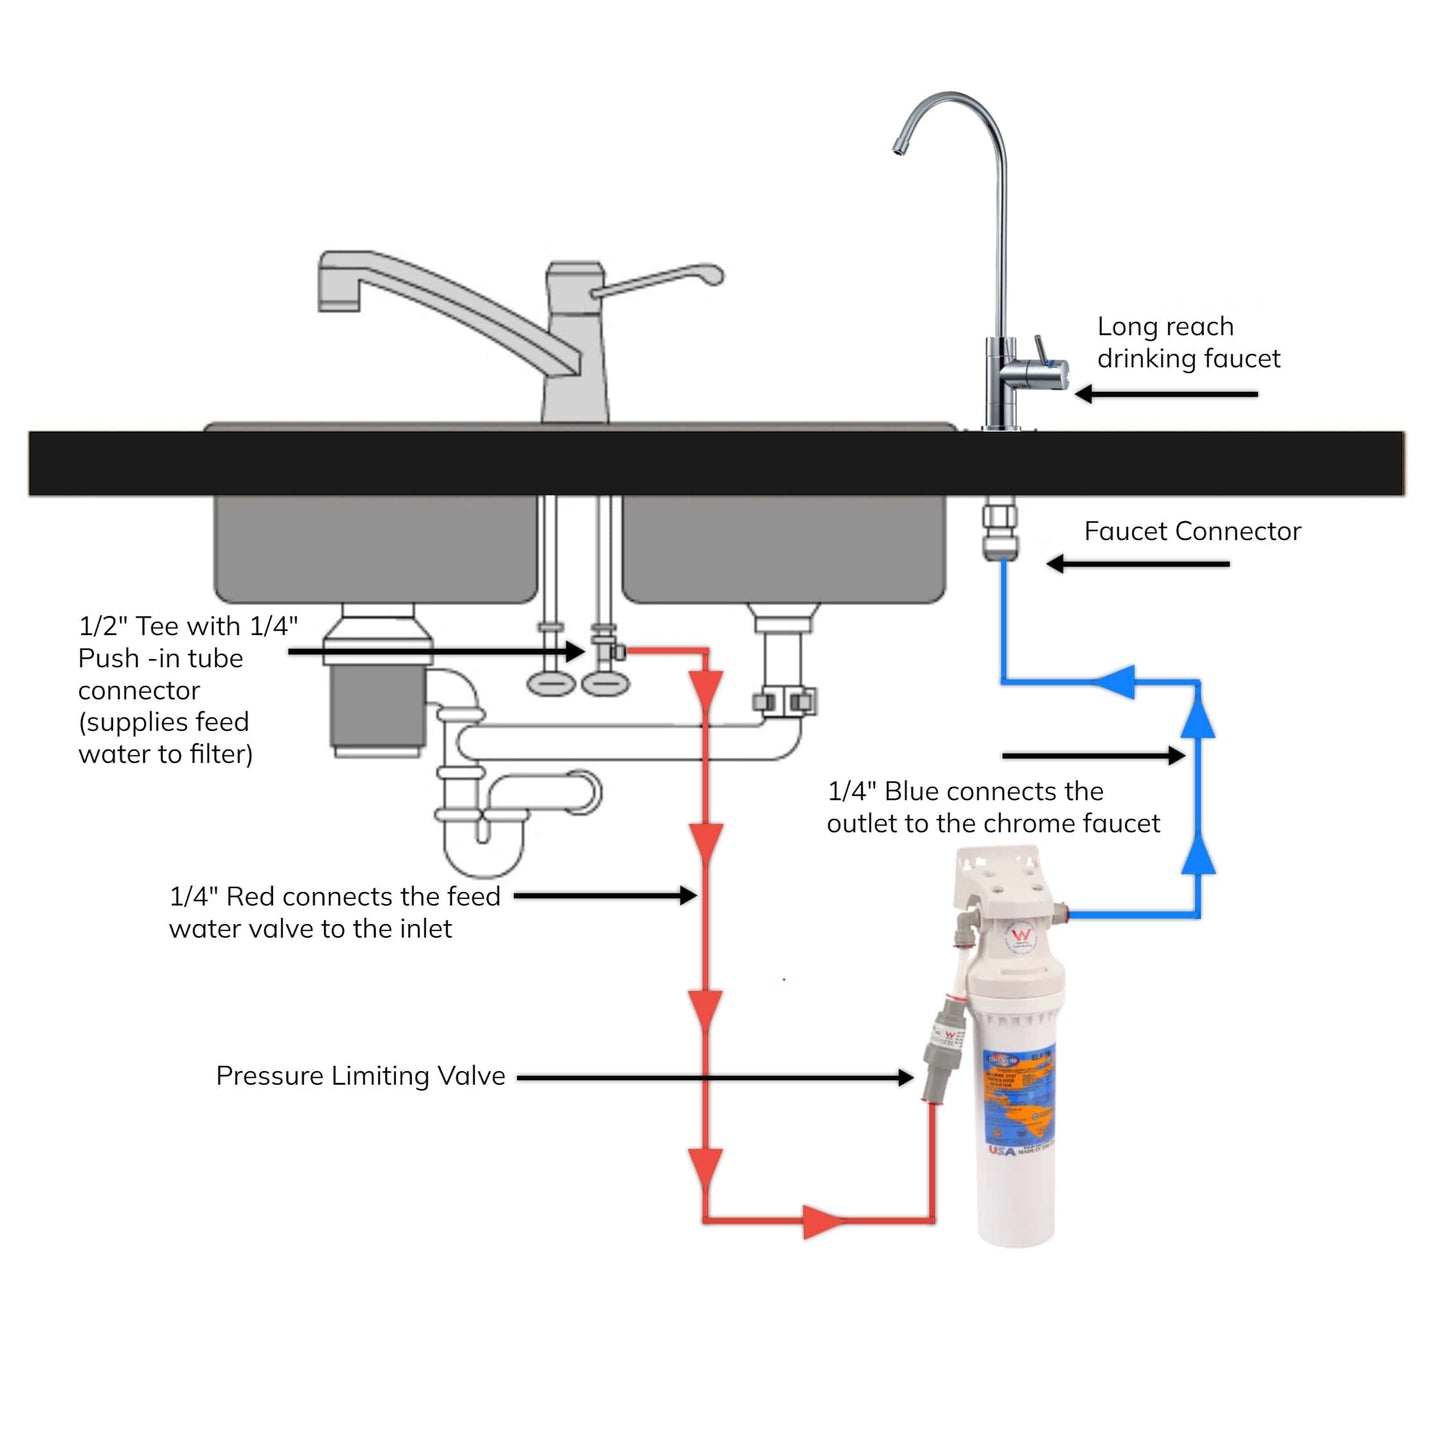 High Capacity Inline Filter System - One Filtration Stage - For Chlorine, Taste, Odours and Parasites.